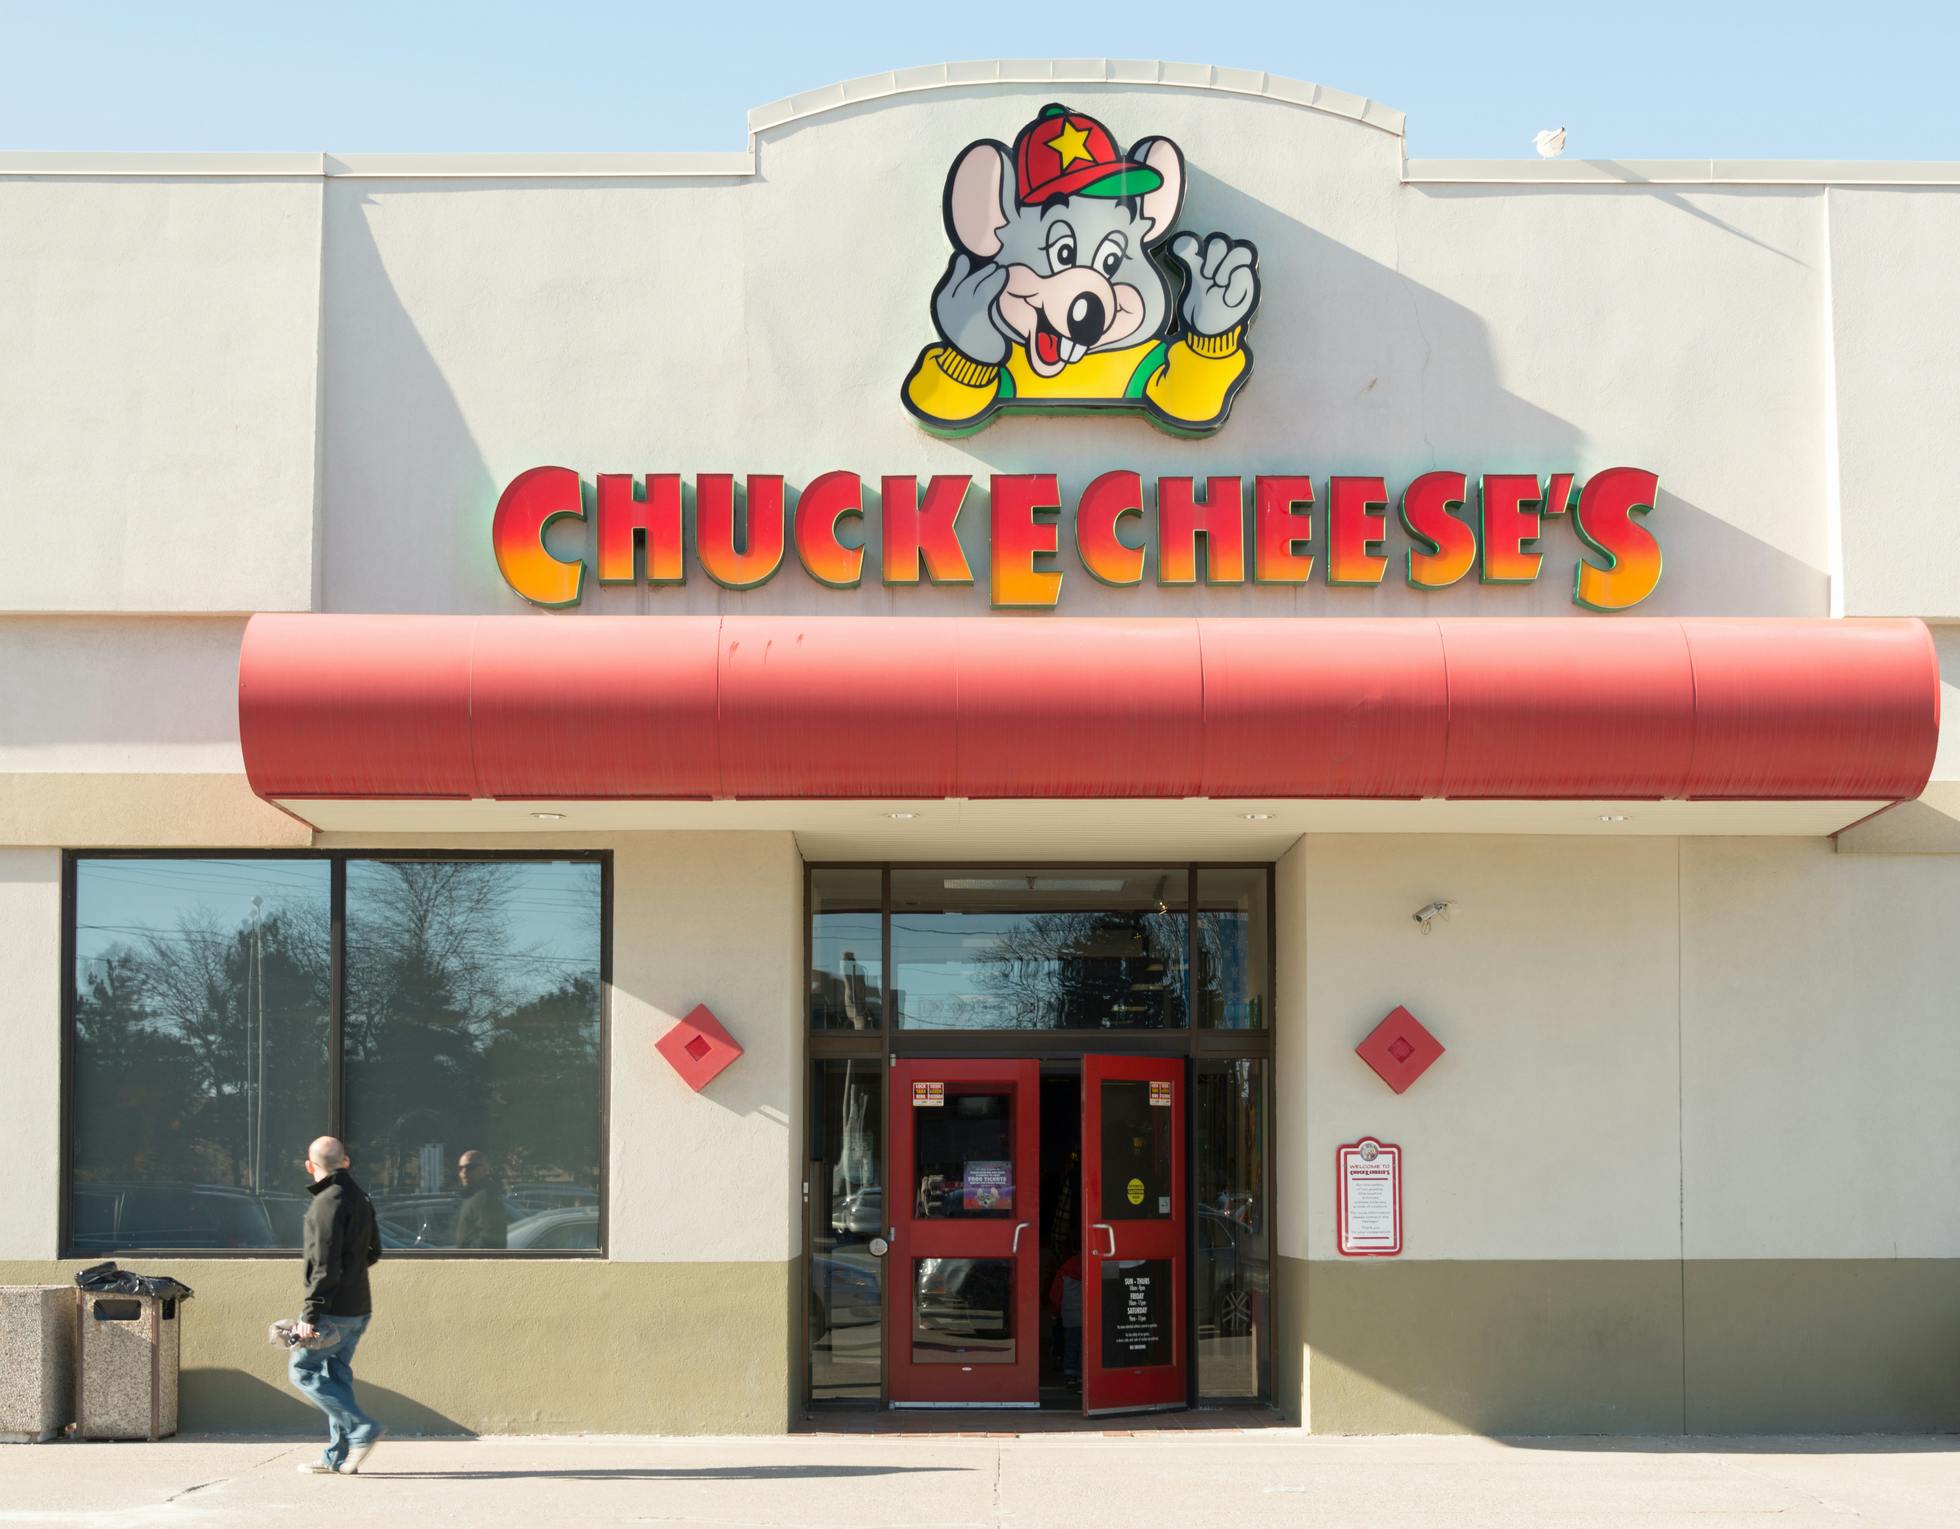 Chuck E Cheese entrance in Canada during the day.